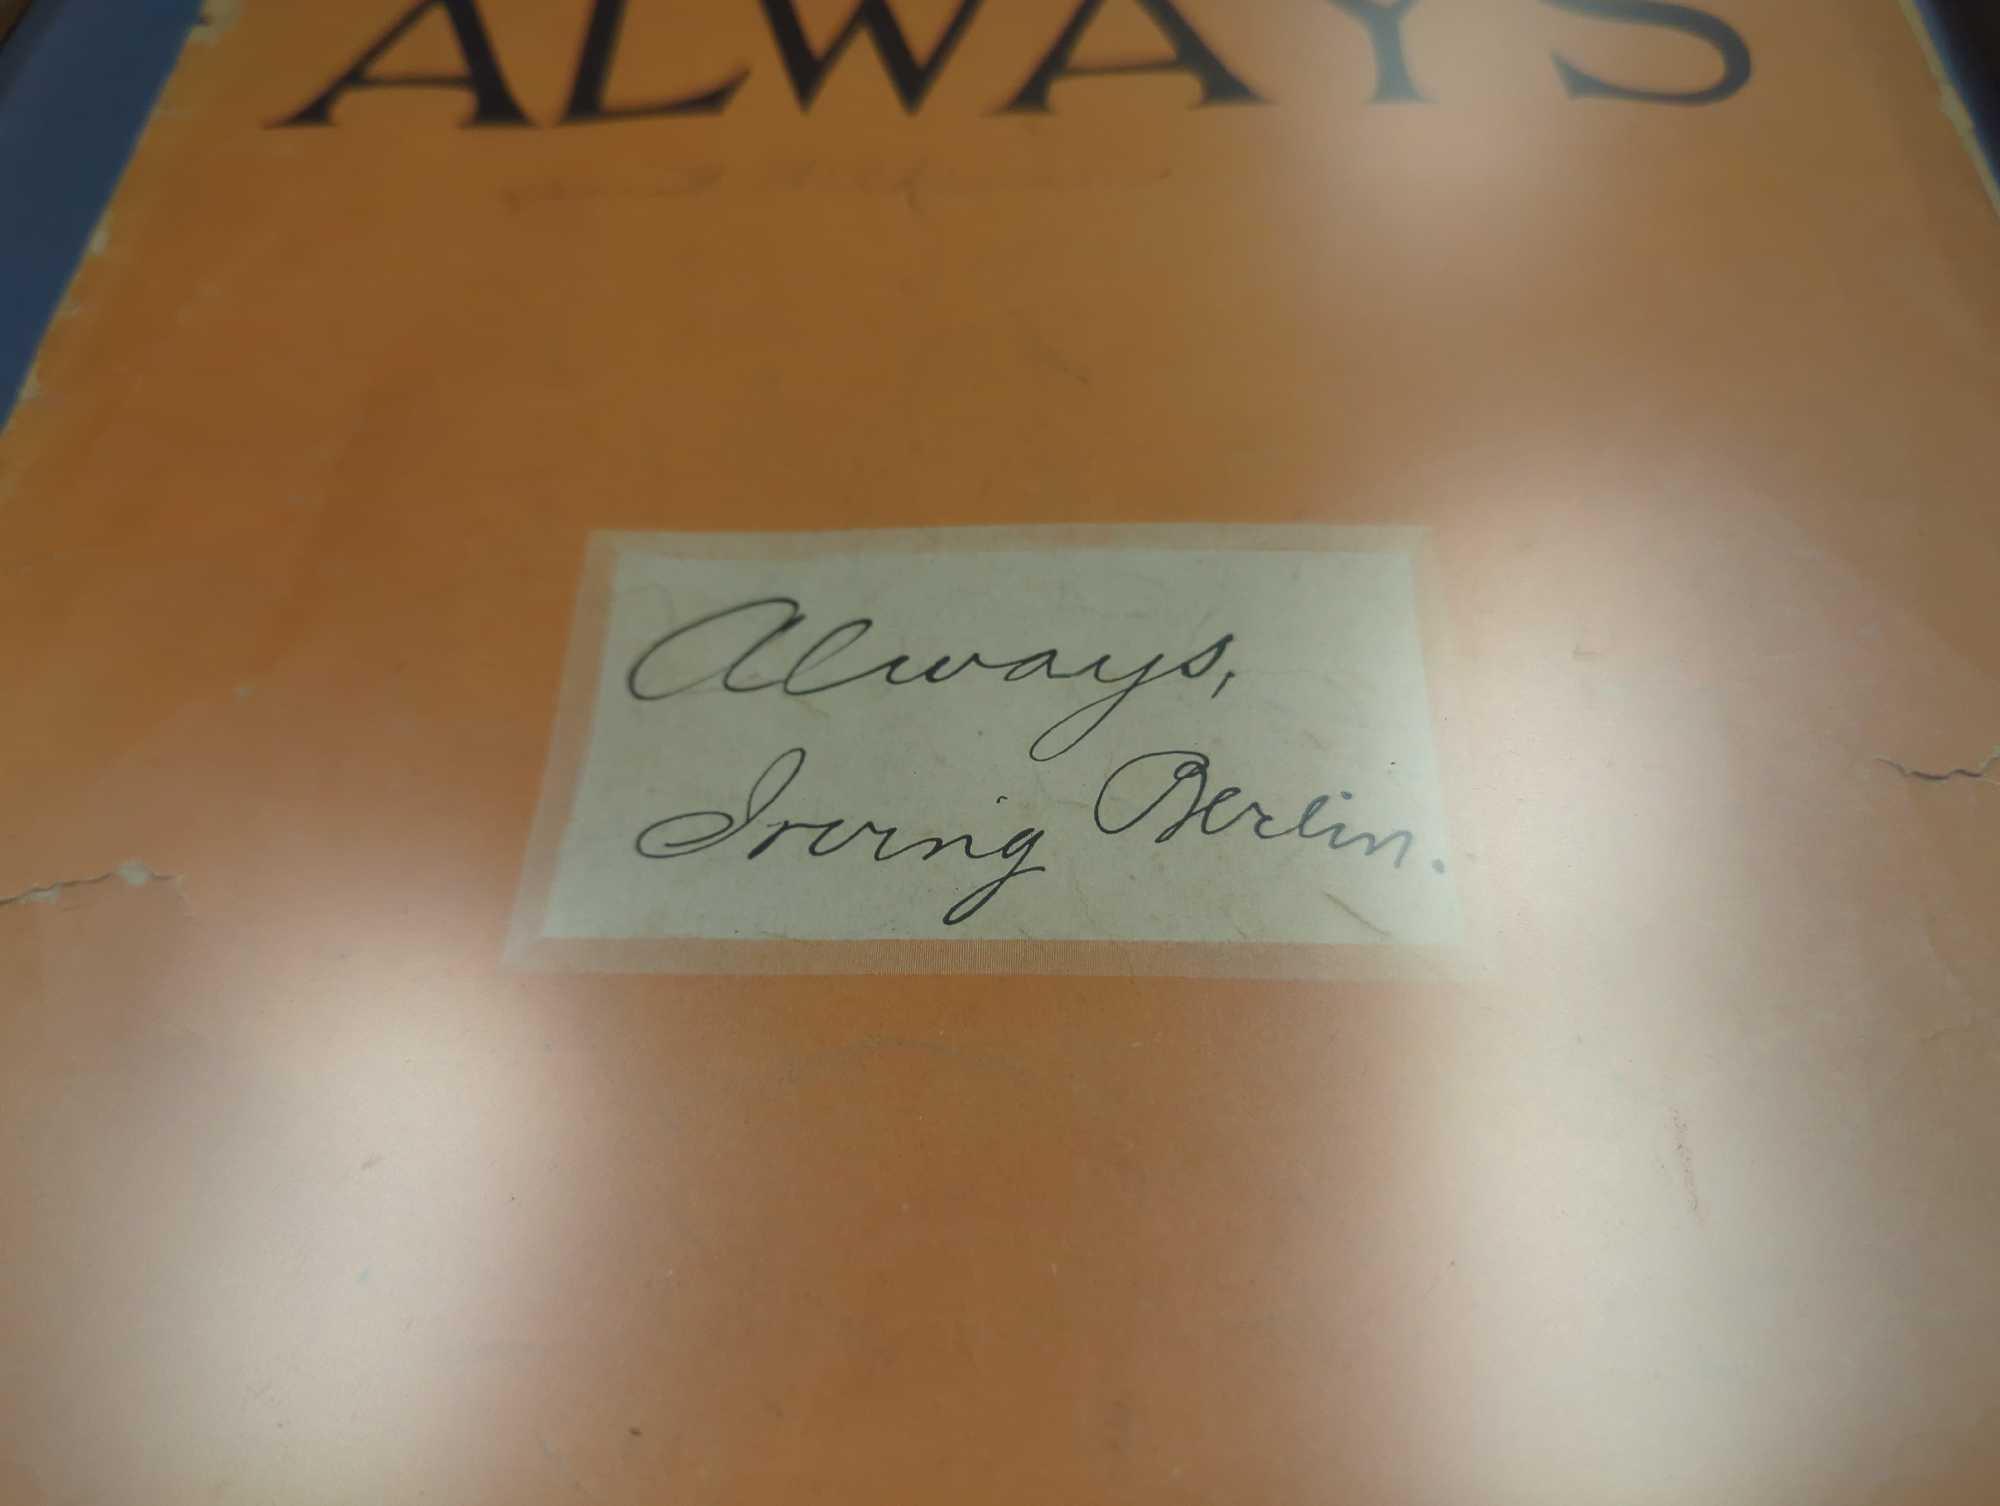 Framed Book Cover of "Always" by Irving Berlin, Approximate Dimensions - 15" x 12", What You See in